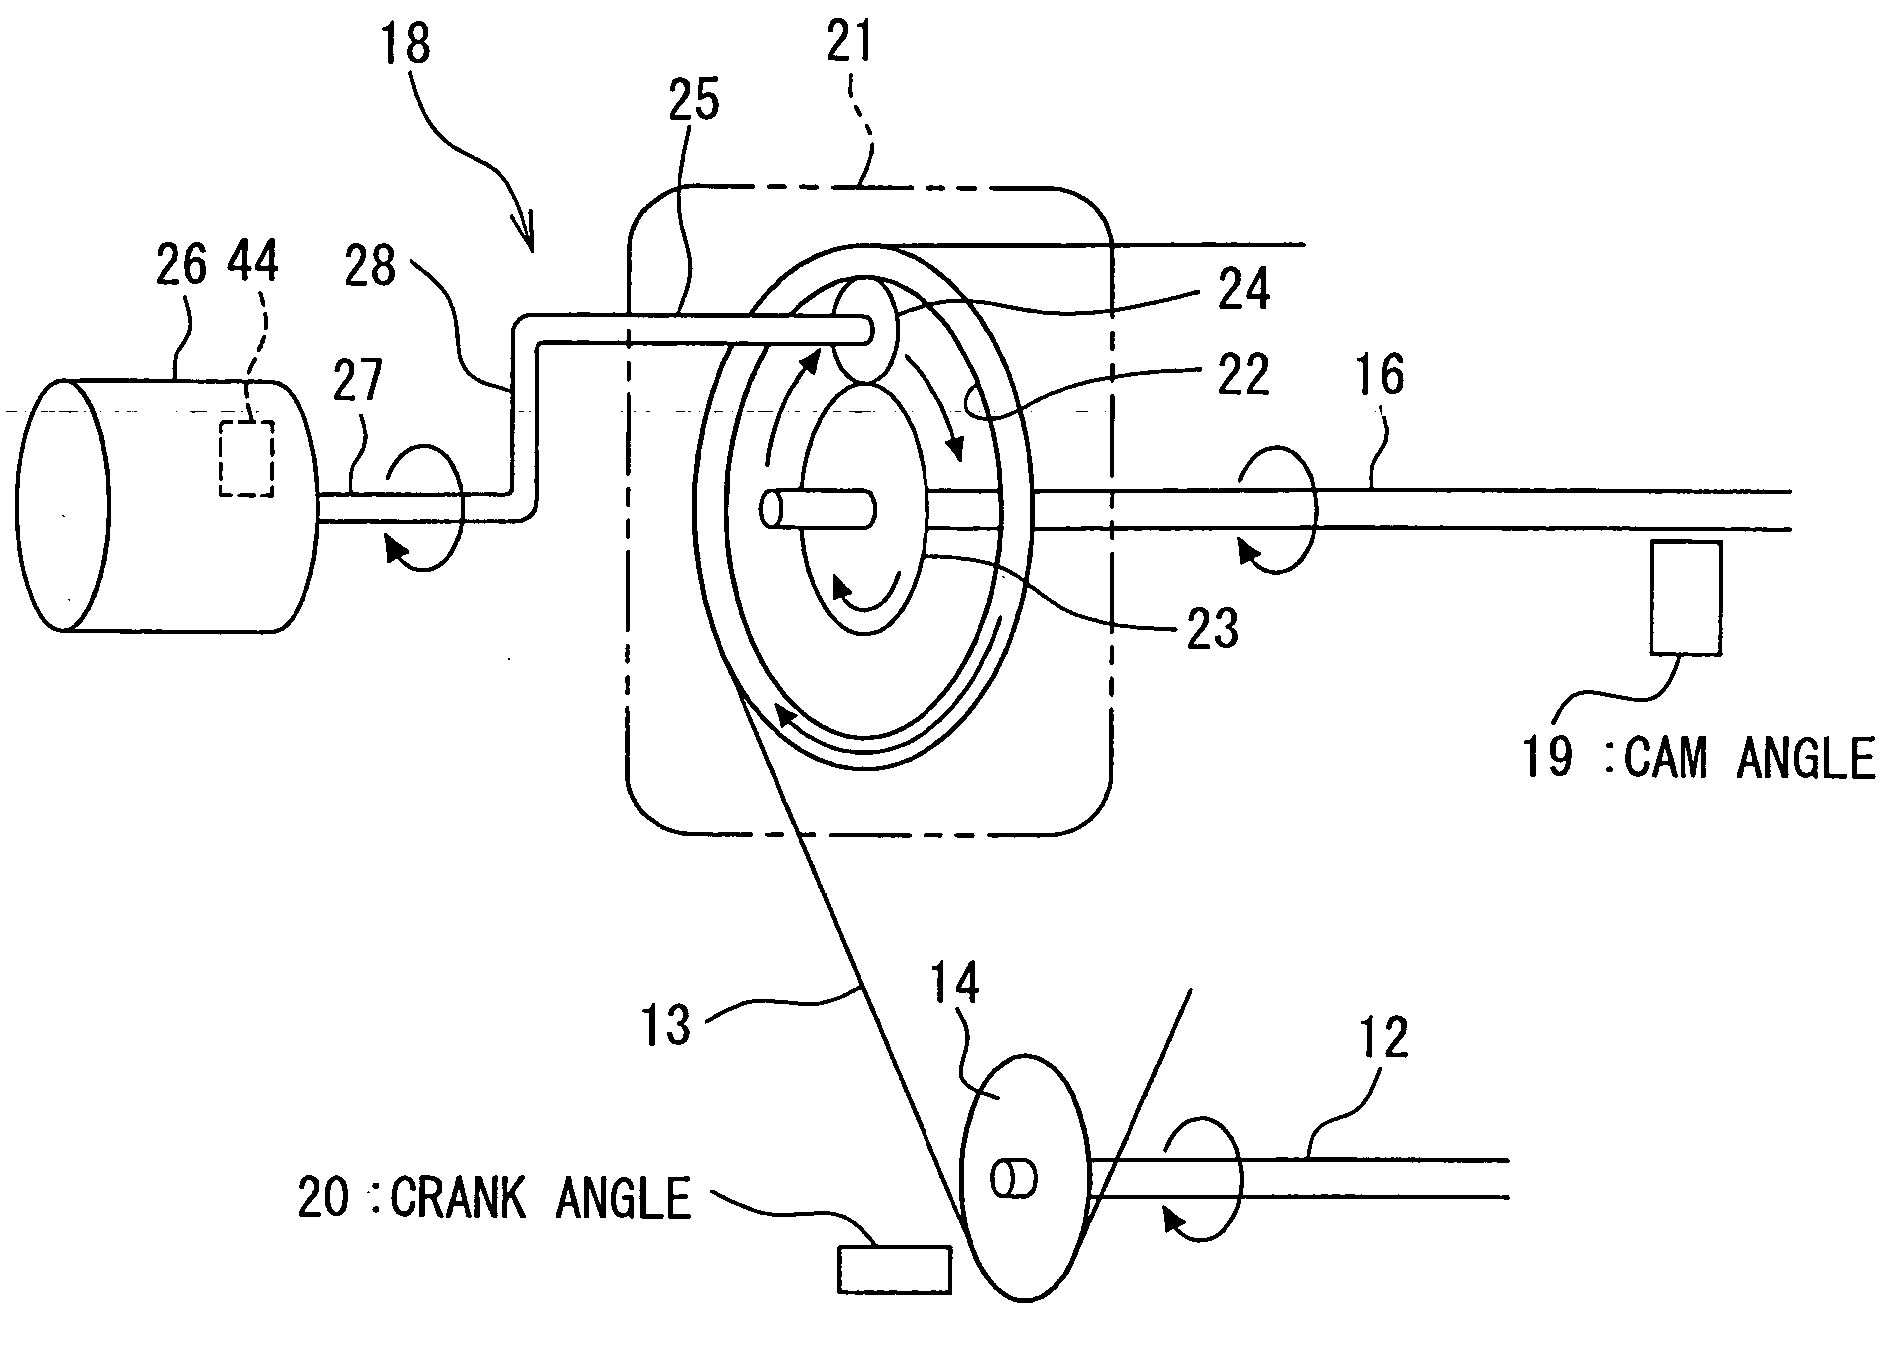 Engine rotation condition detecting system and engine control method